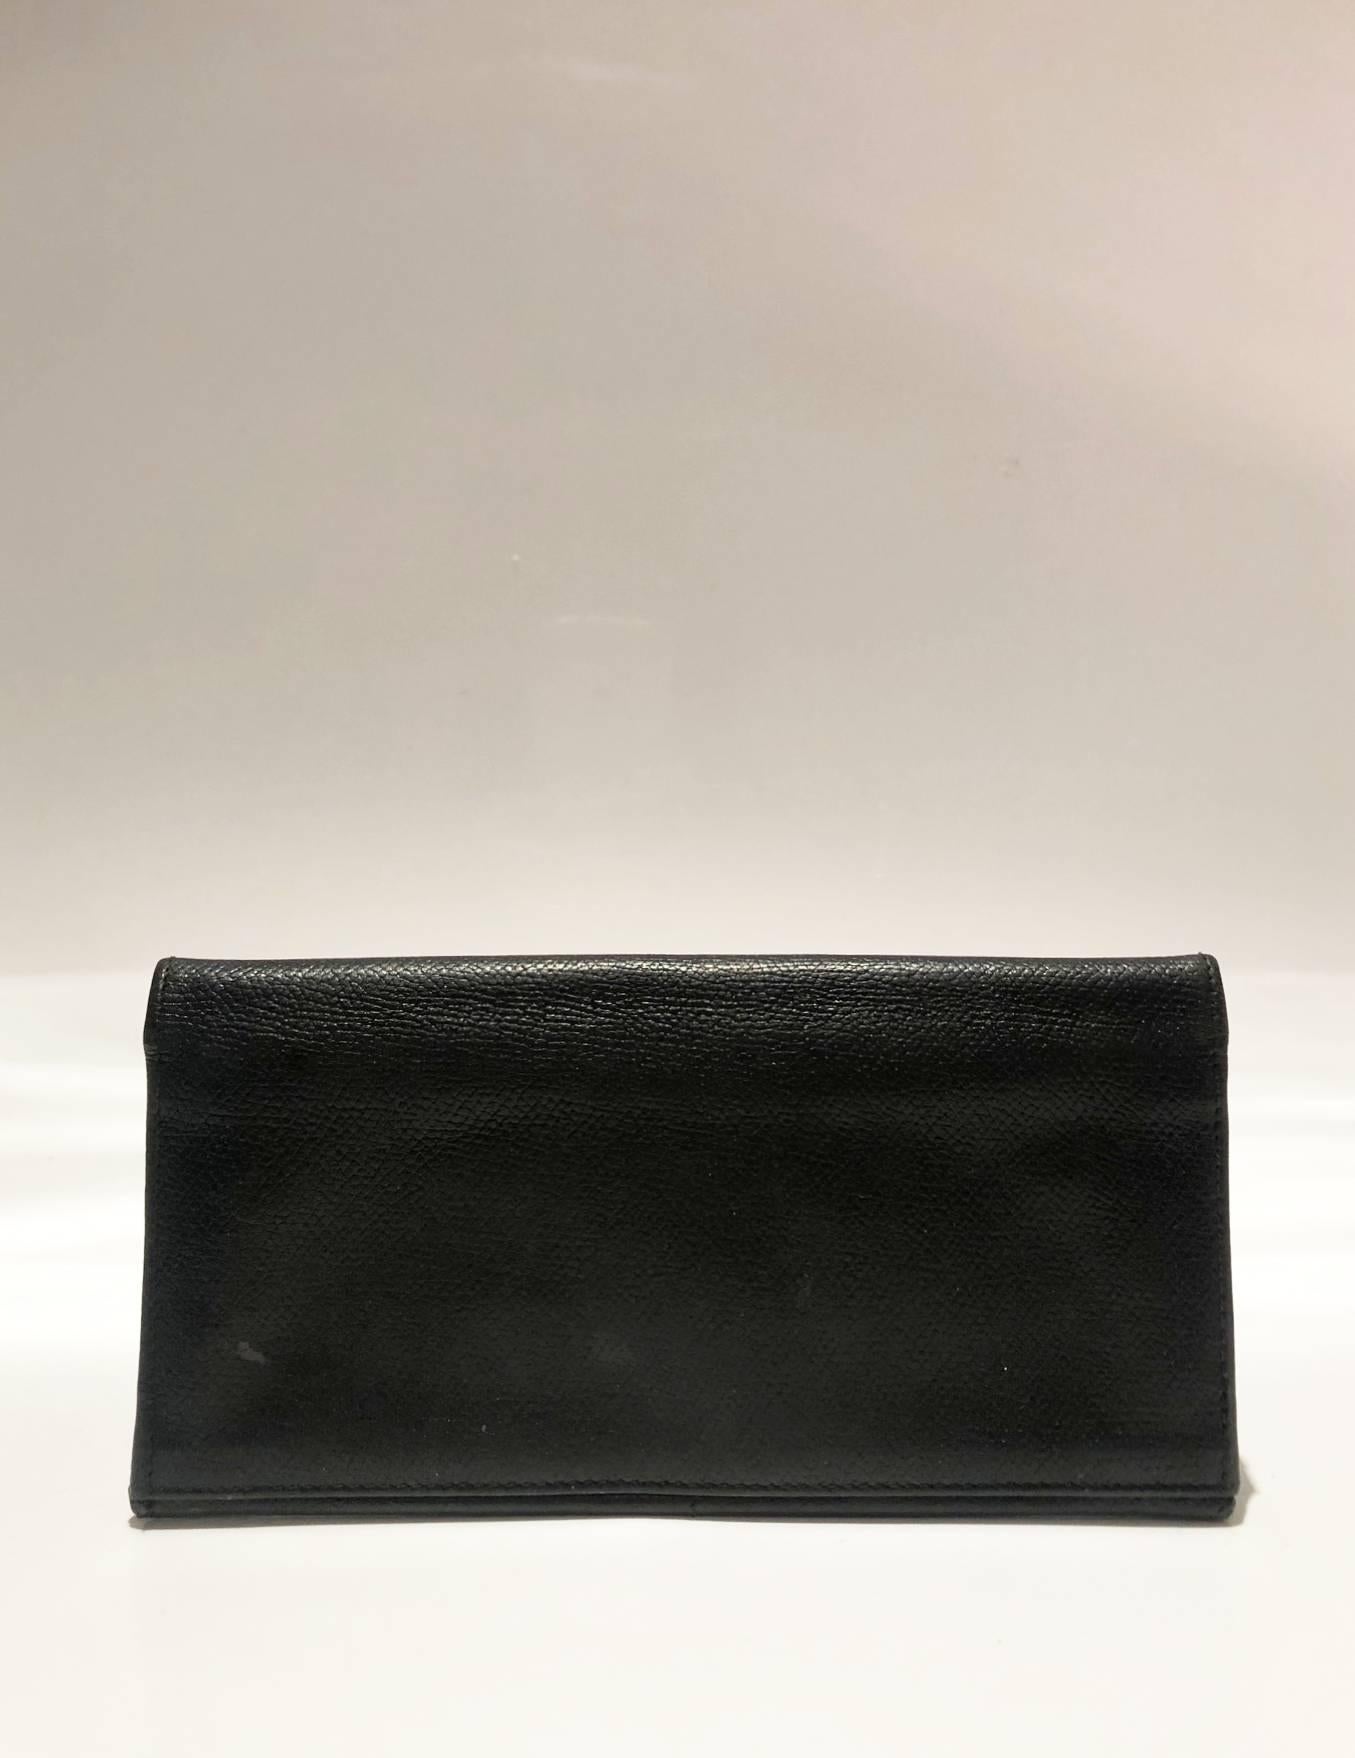 FREE UK and WORLDWIDE DELIVERY 

YVES SAINT LAURENT stud wallet purse featuring navy blue madras leather, silver studs, card slots, 3x note slots, zipped compartment for change


Condition: Vintage, very good, 1980s / 1990s
Dimensions: 18X9.5X3cm  